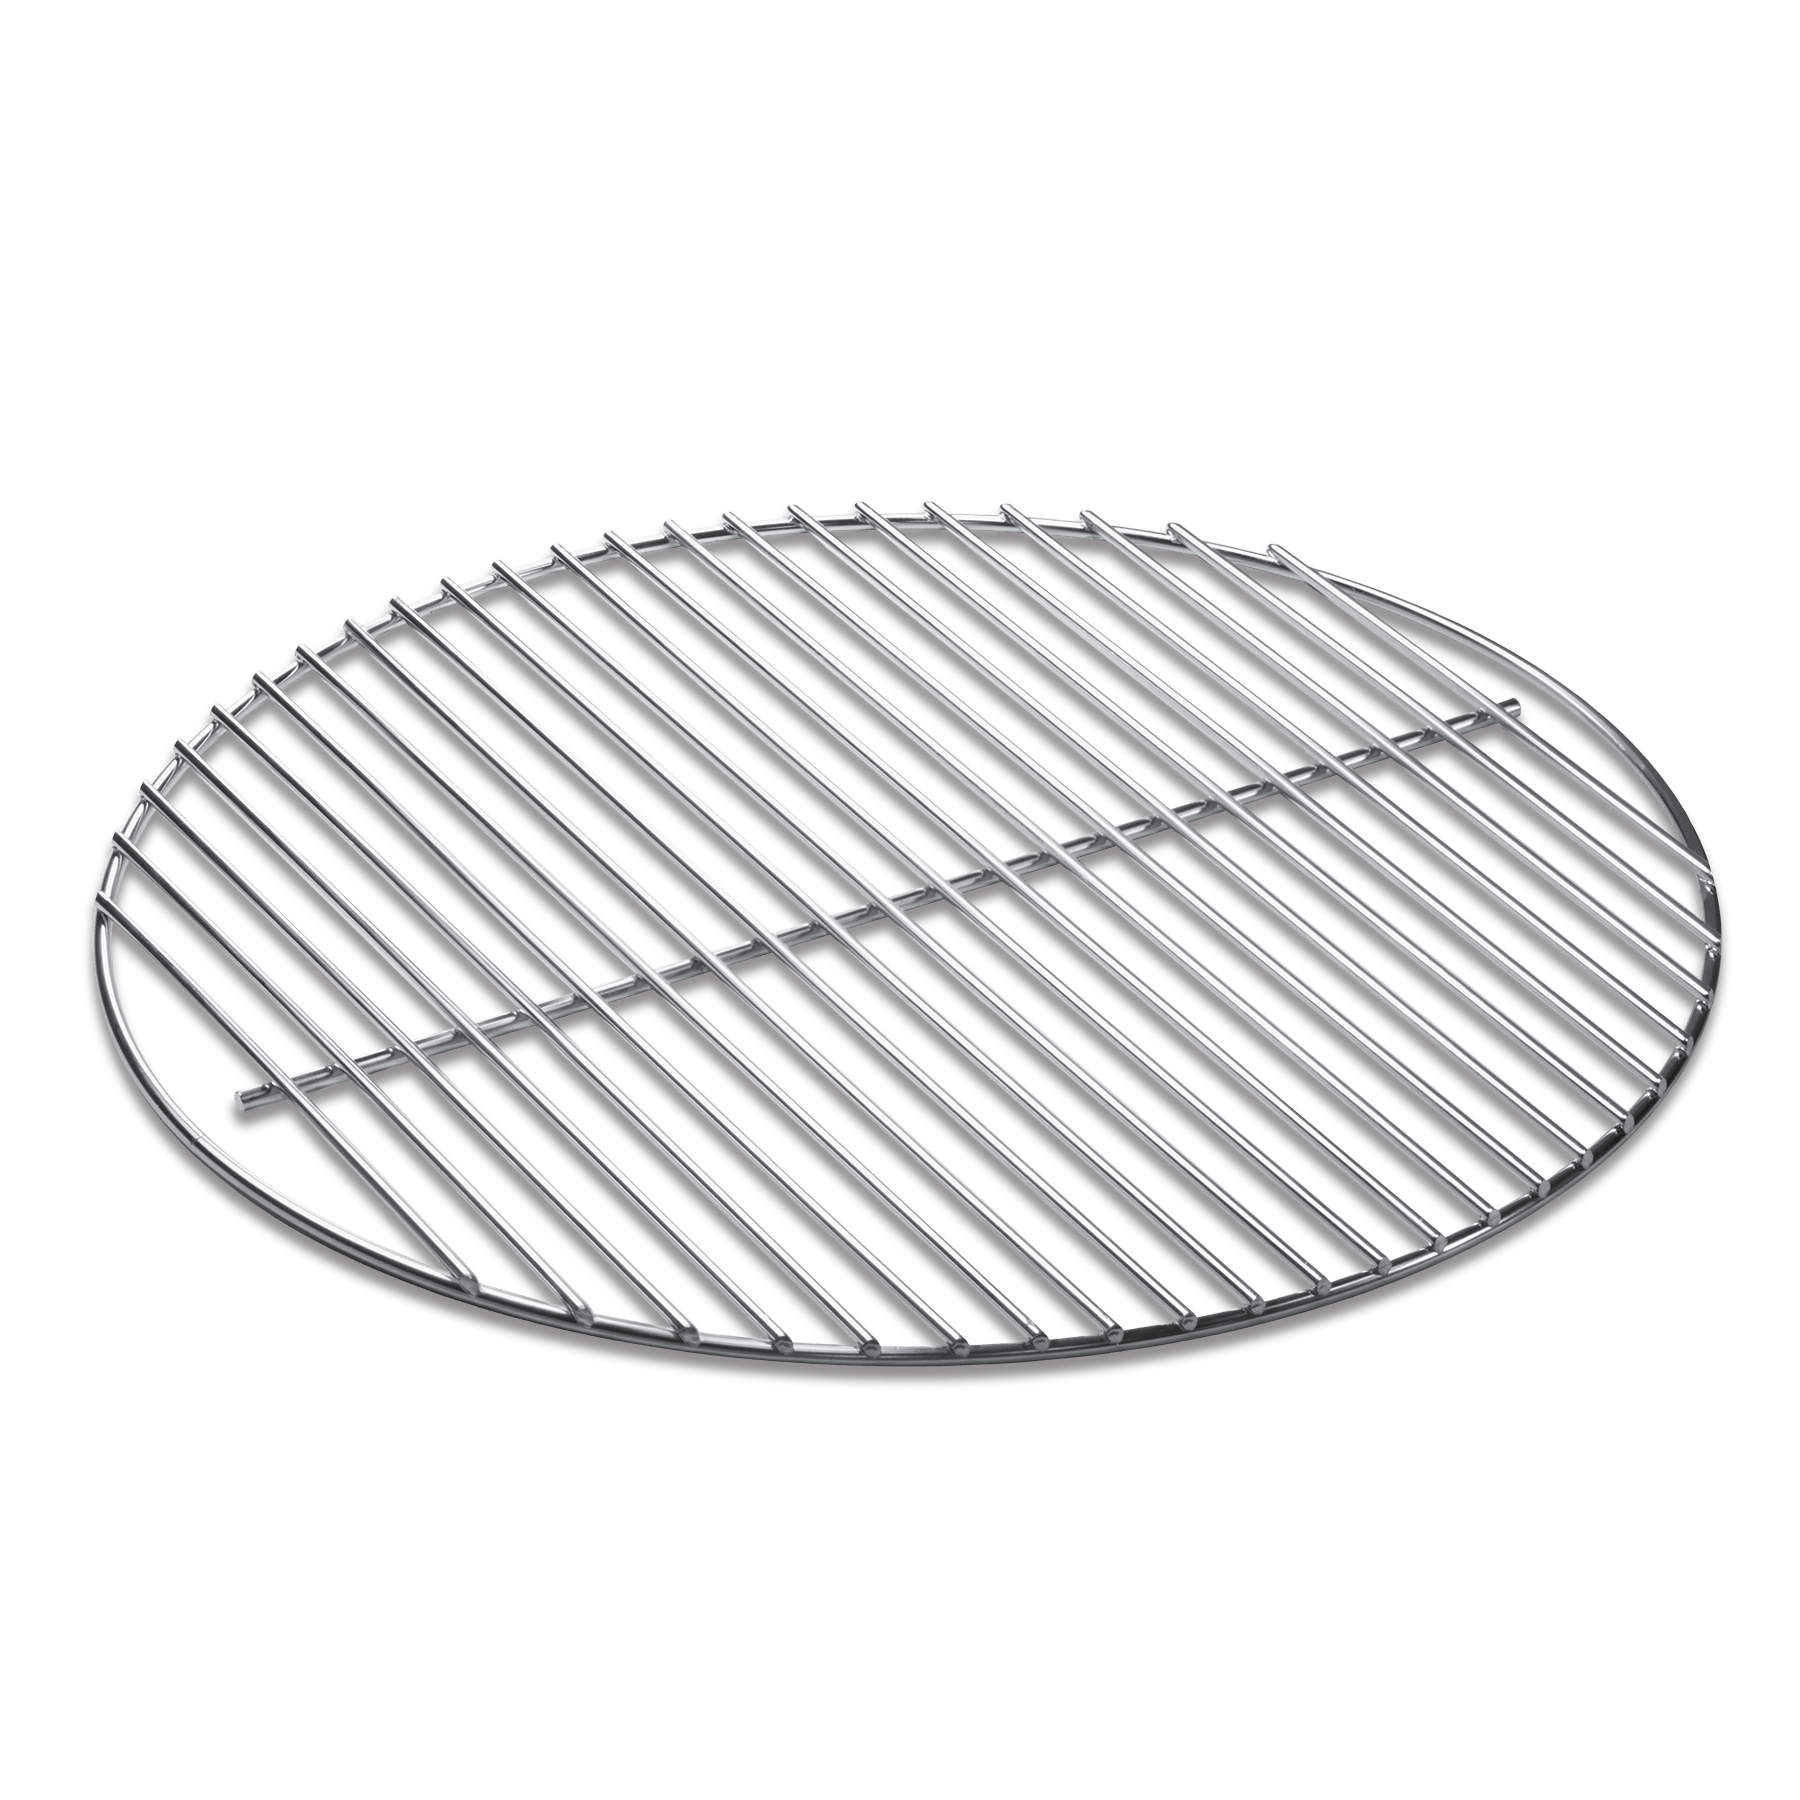 Cooking Grate 14 Charcoal Weber Grills